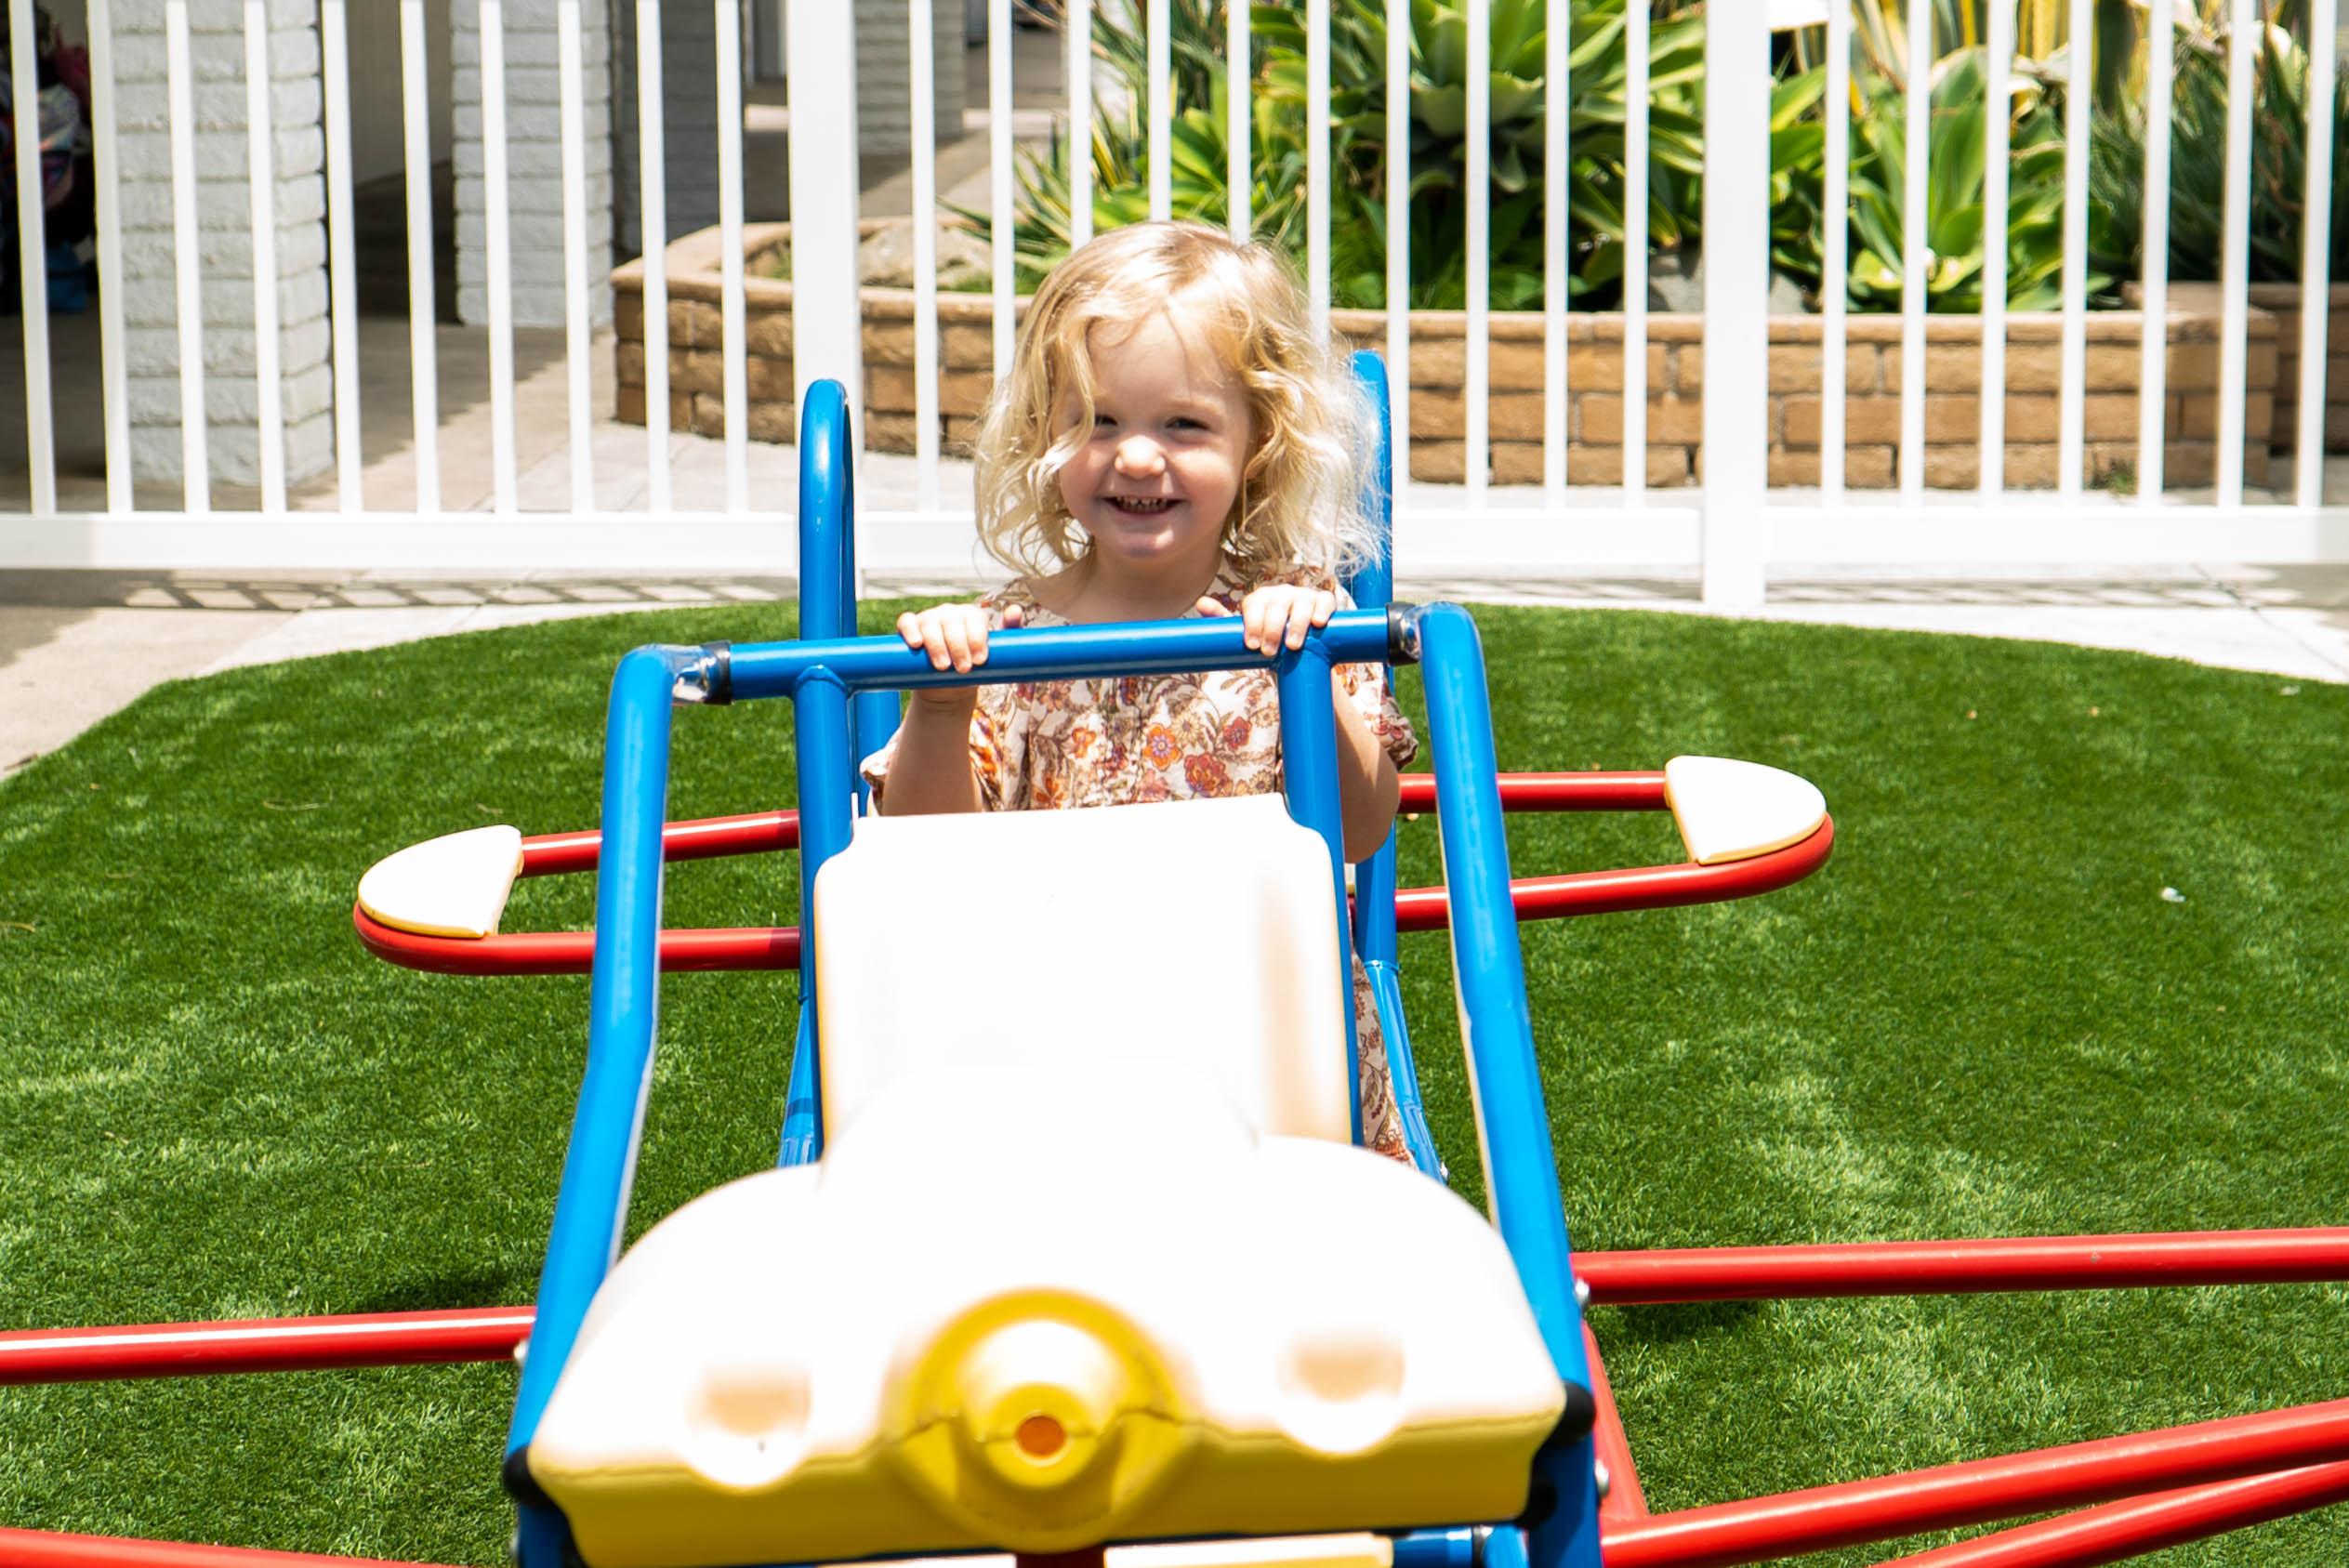 Our preschool playground offered a breath of fresh air for our preschoolers.